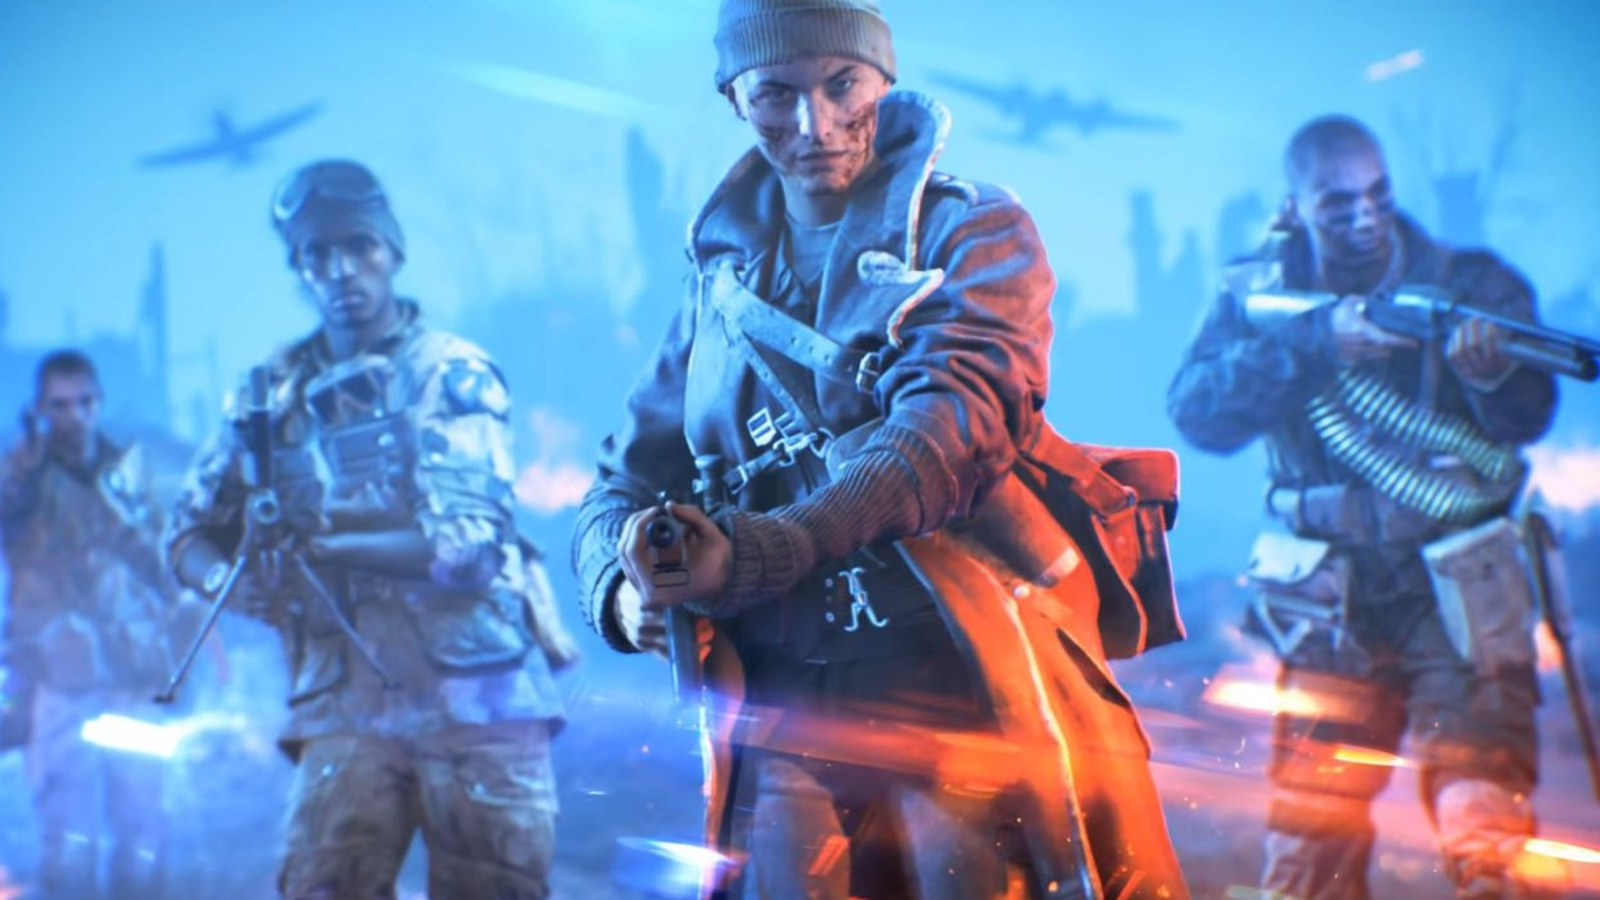 See you in BF4”: Battlefield 2042 review-bombed, now one of Steam's worst  games